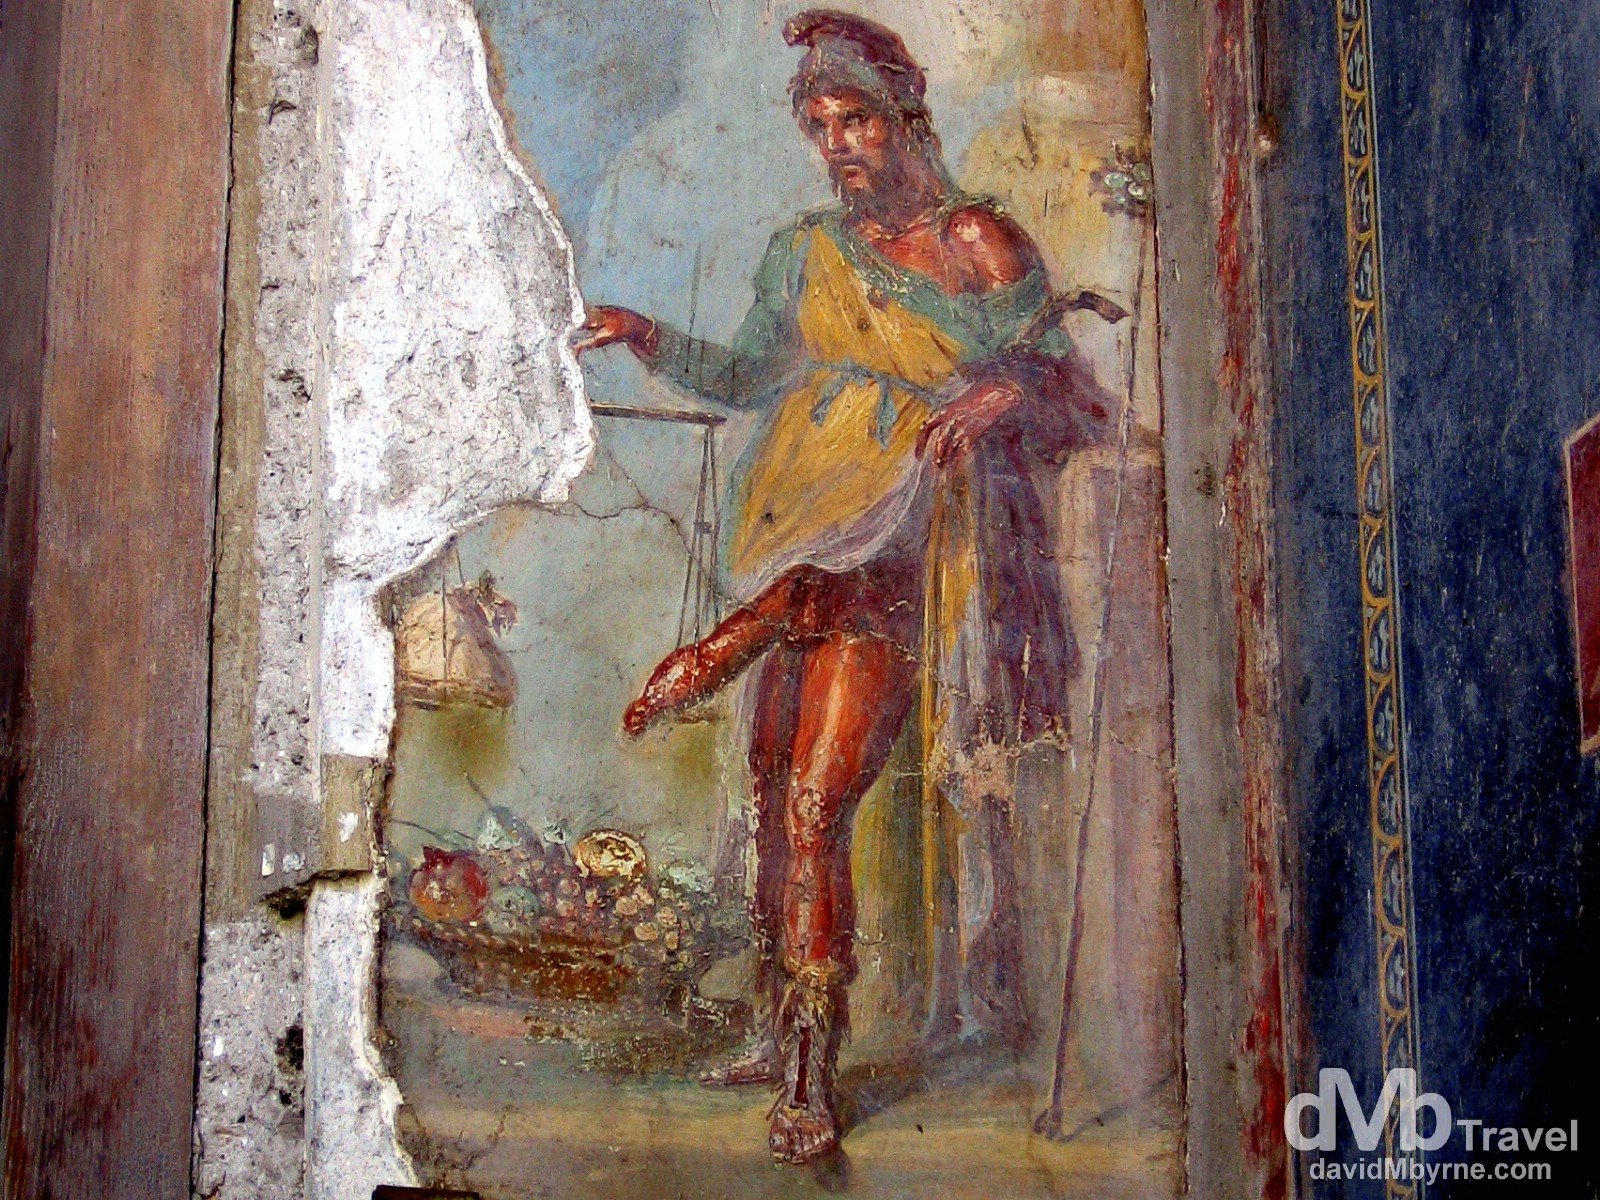 An erotic mural on display in the Roman ruins of Pompeii, Campania, Italy. September 5th, 2007.